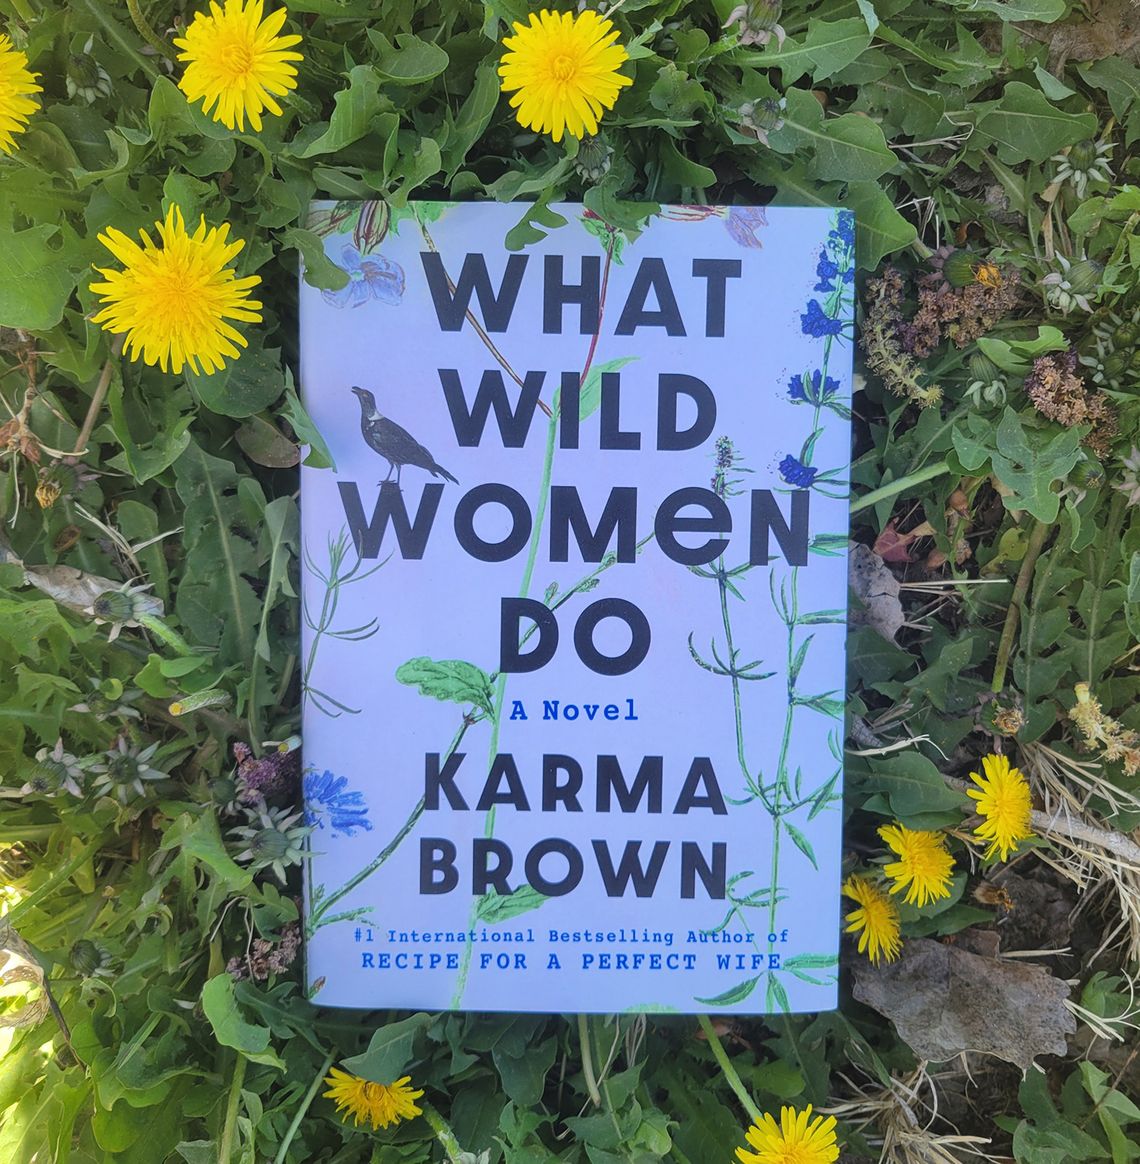 Allison’s Book Report - “What Wild Women Do” by Karma Brown